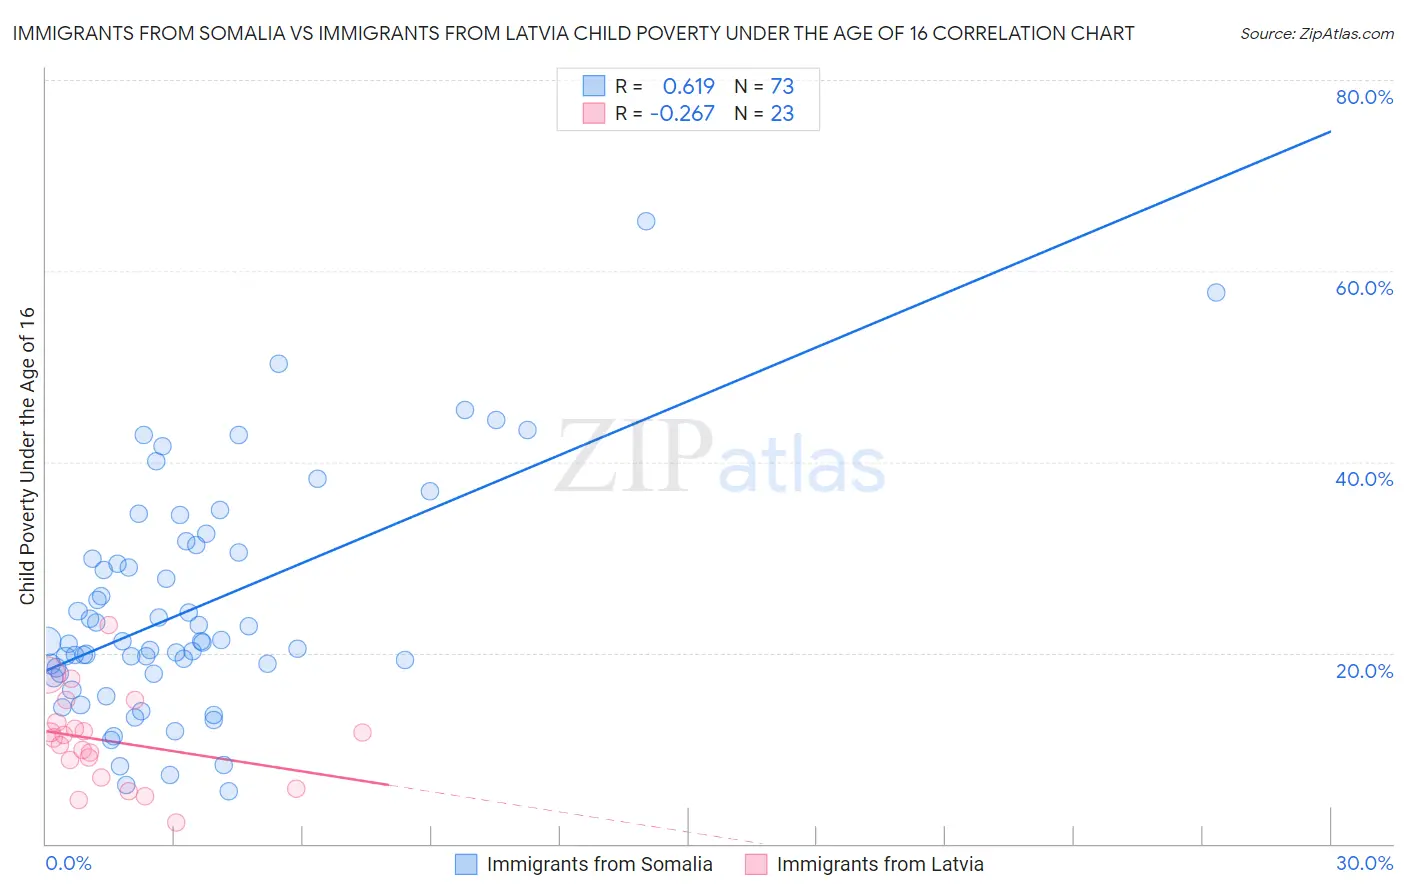 Immigrants from Somalia vs Immigrants from Latvia Child Poverty Under the Age of 16